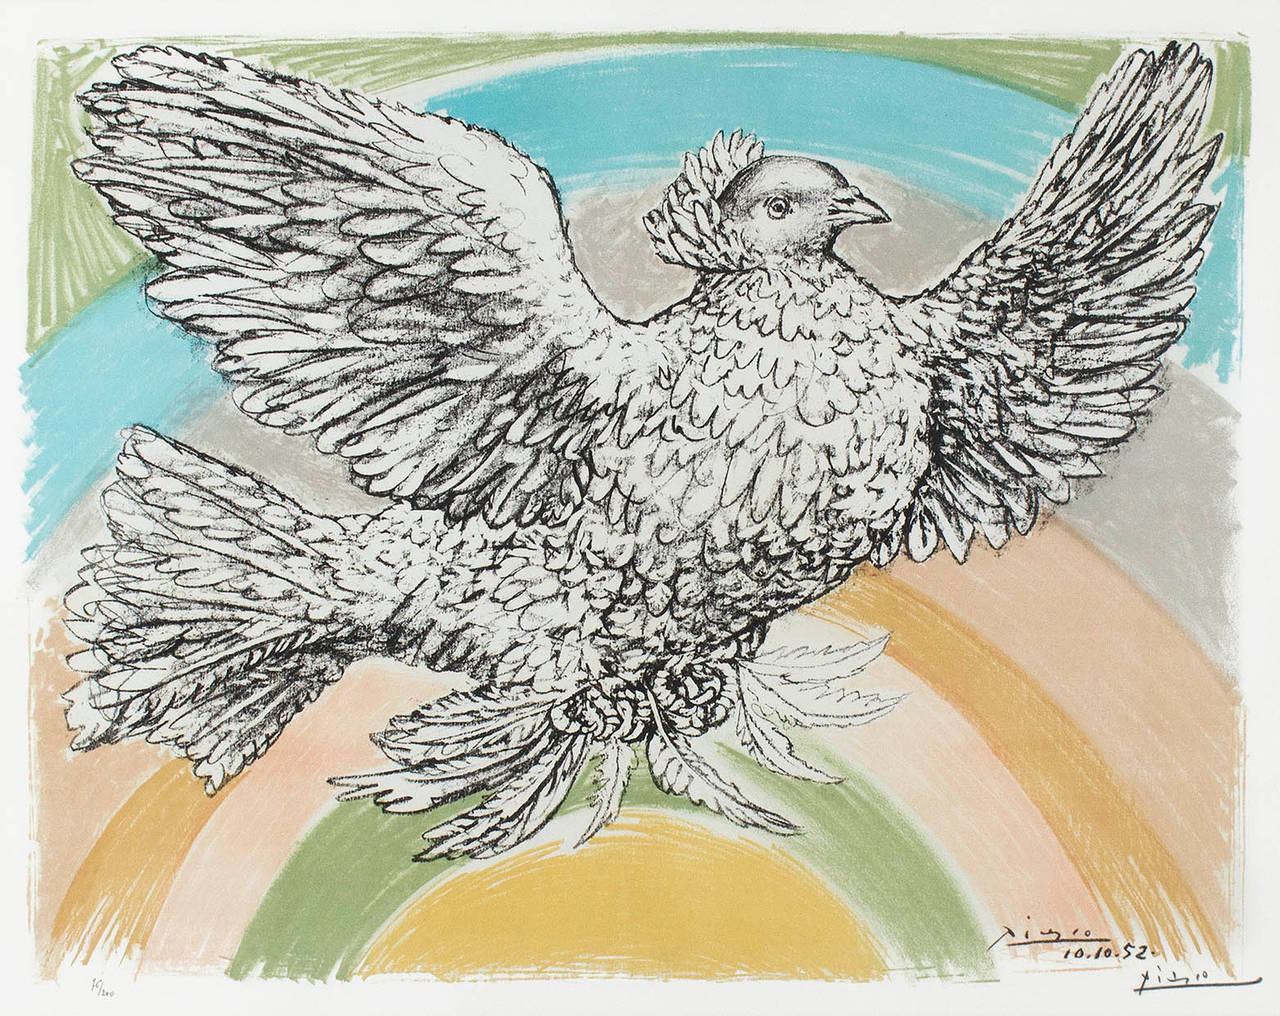 Colombe Volant (Flying Dove), 1952 - Print by Pablo Picasso